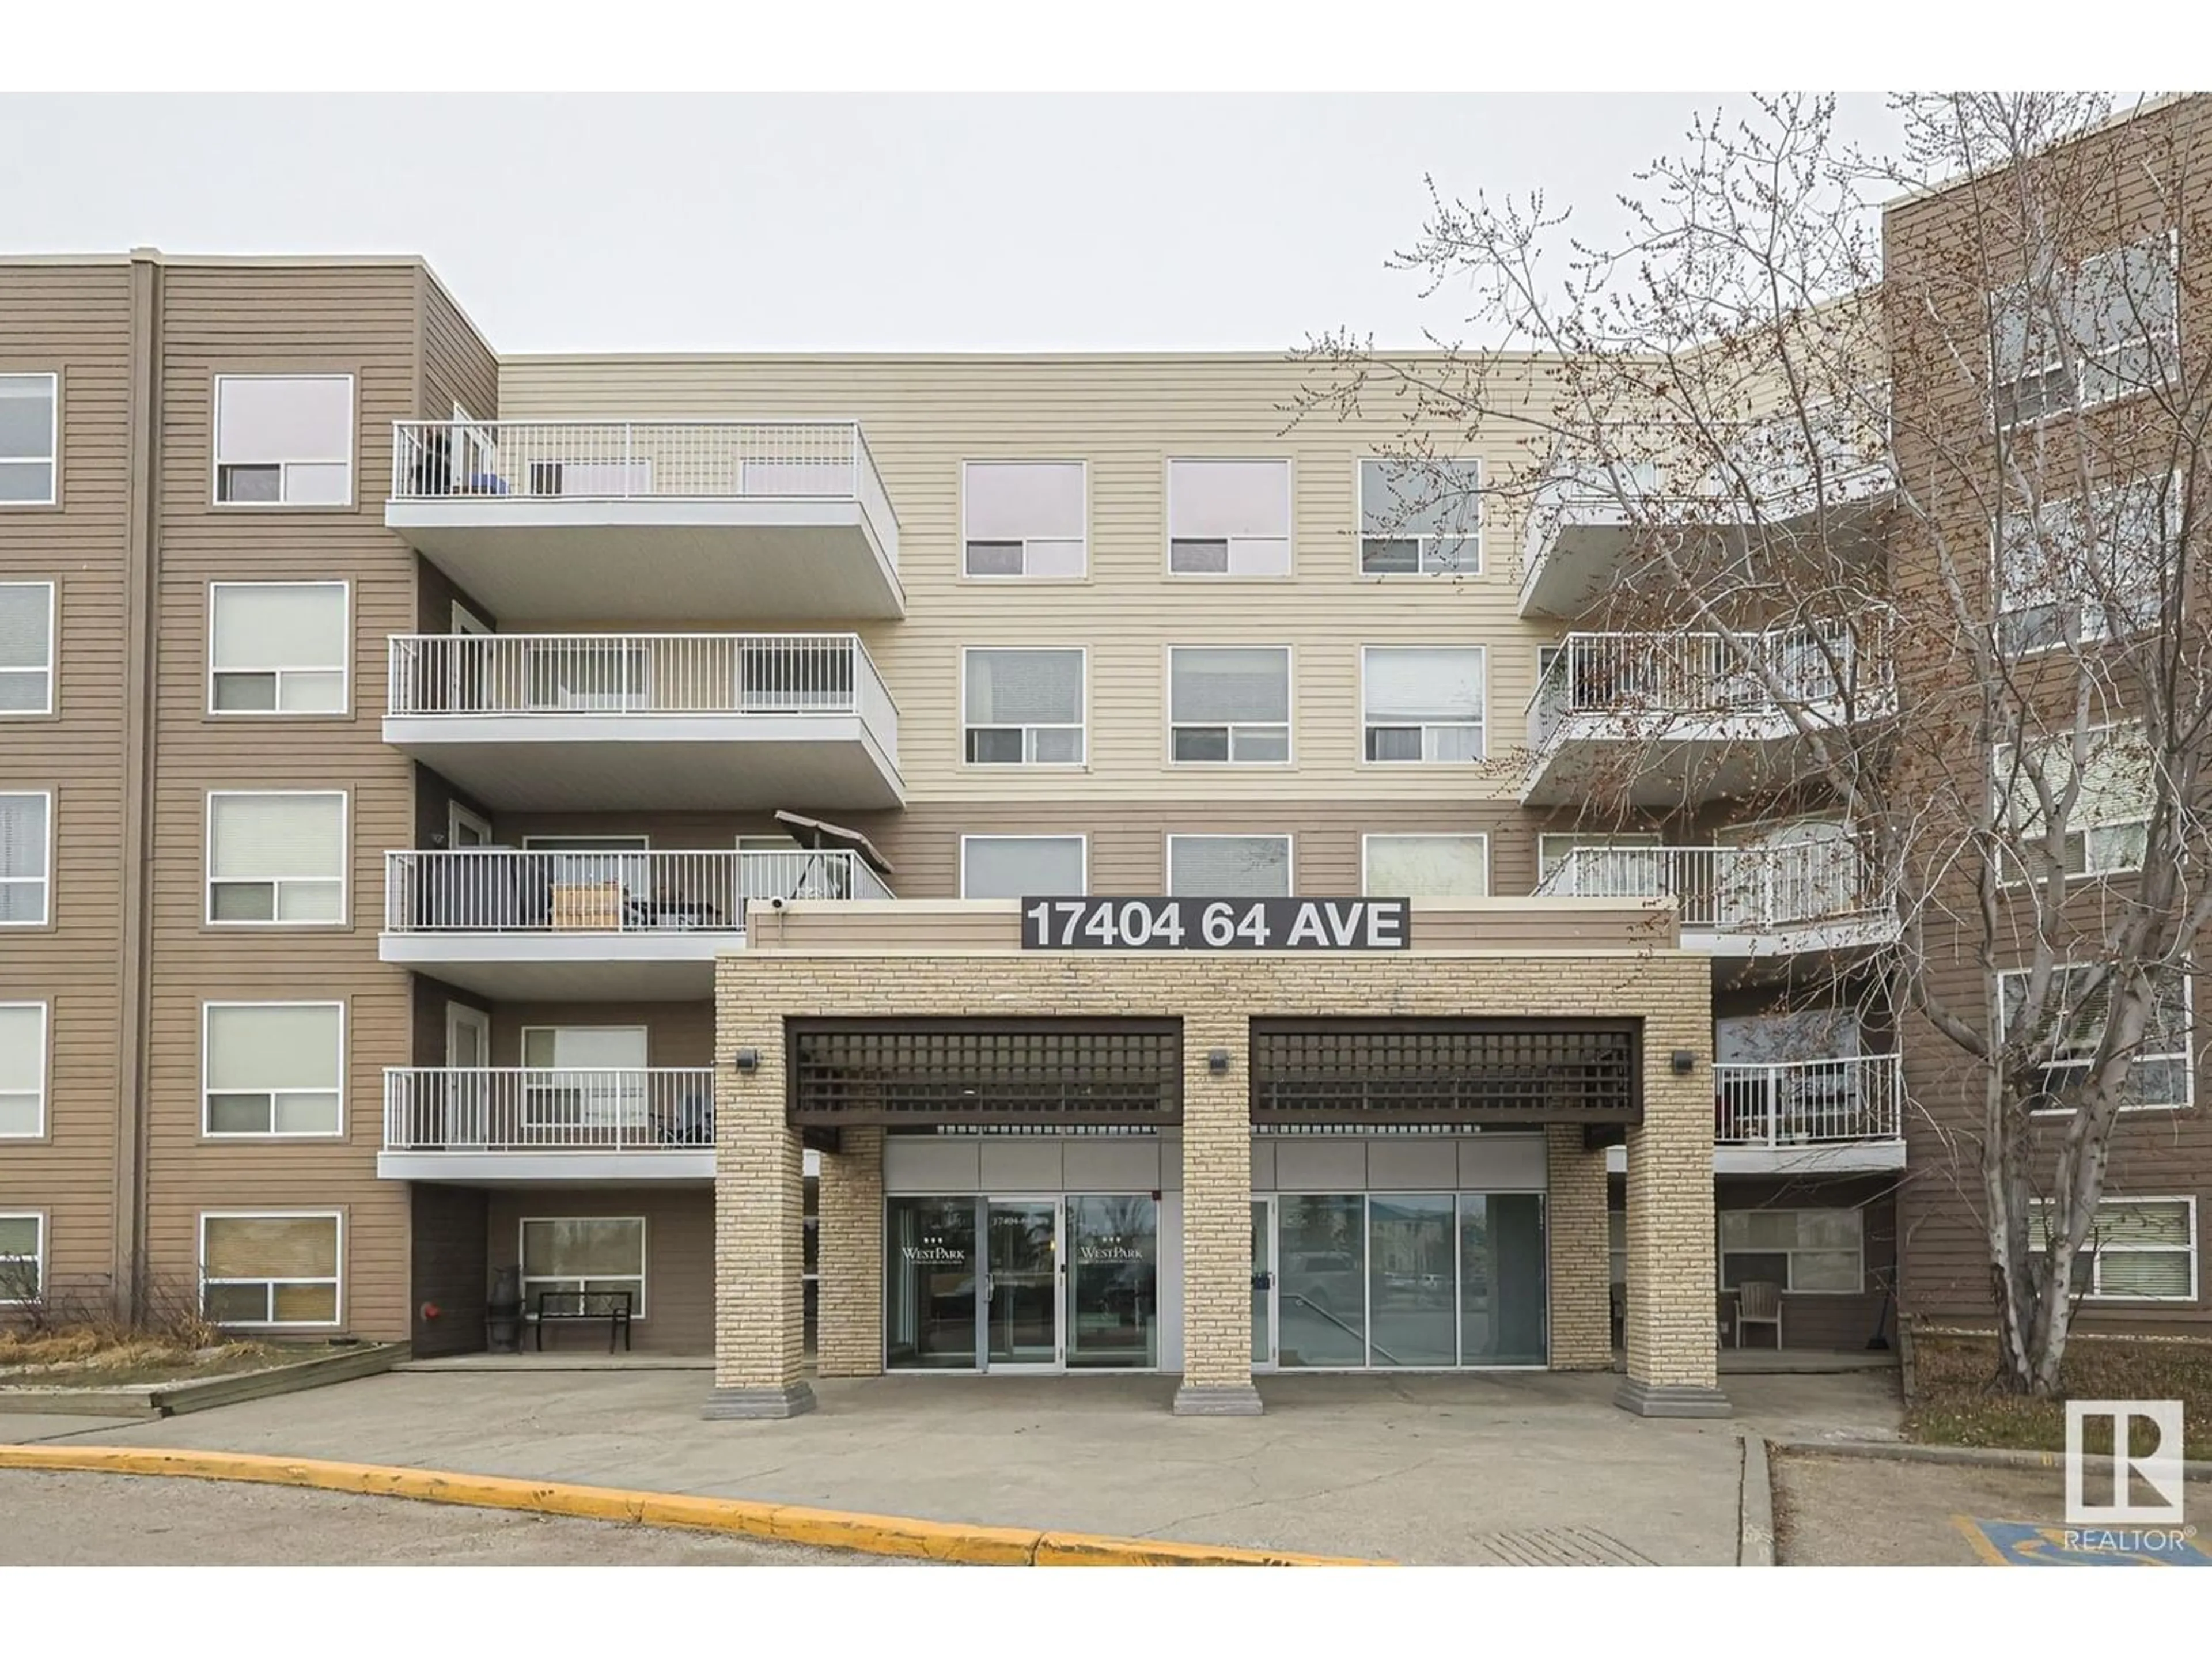 A pic from exterior of the house or condo for #105 17404 64 AV NW NW, Edmonton Alberta T5T6X4